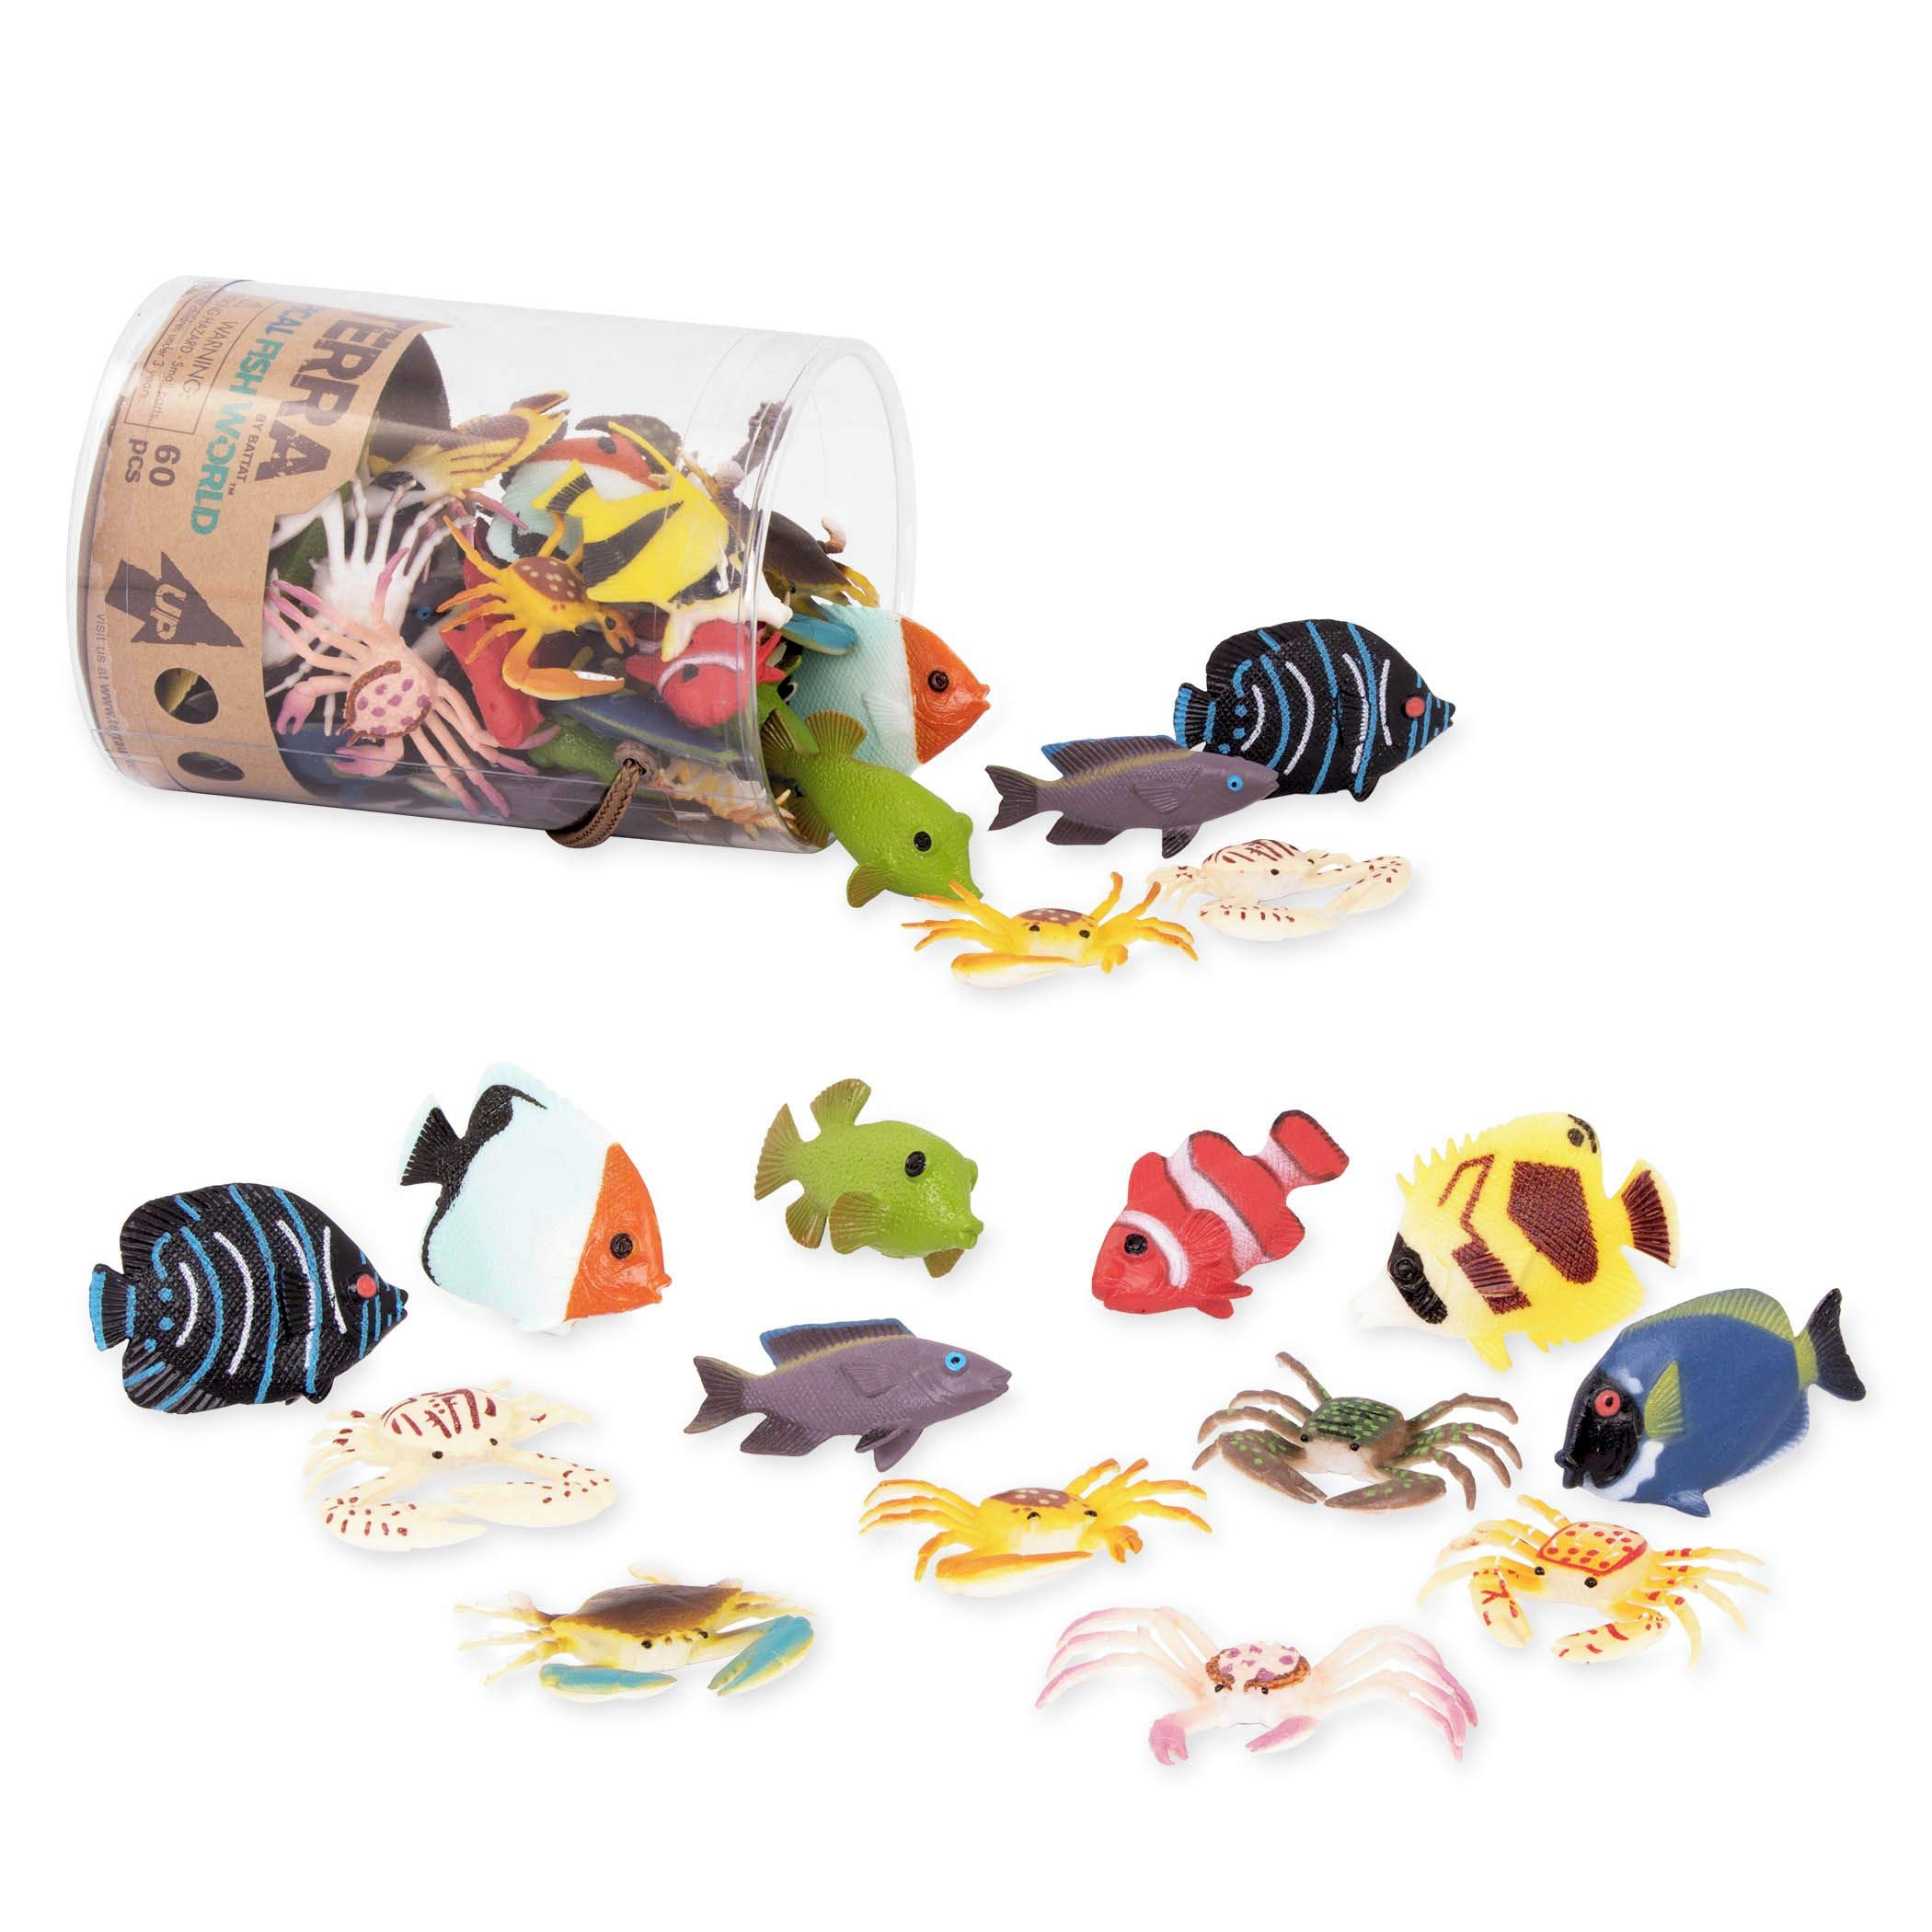 Terra by Battat – Tropical Fish World – Assorted Miniature Sea Animals, Toys for Toddlers 3 & Up (60 Pc), Multicolor